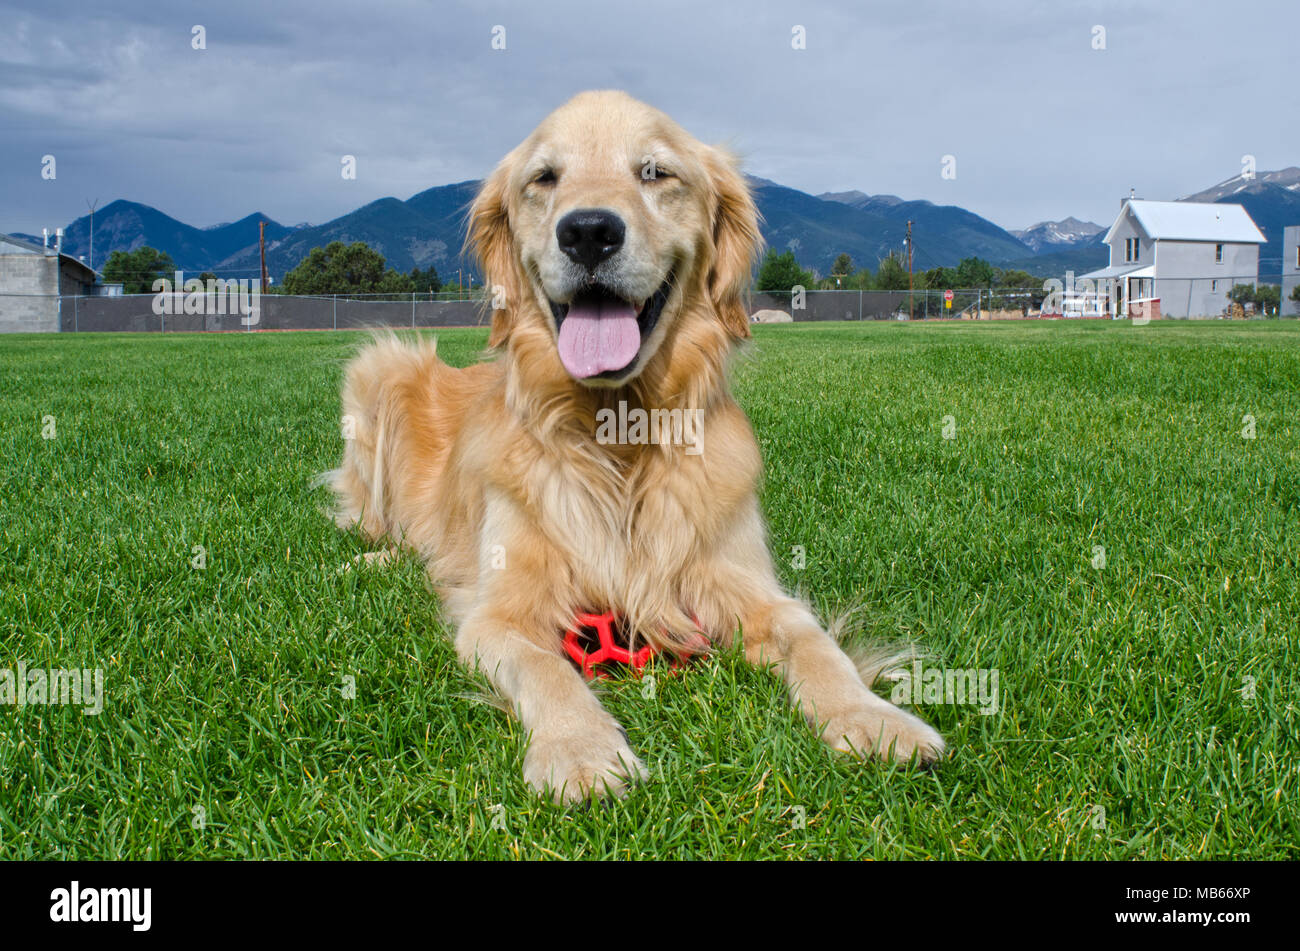 A happy Golden Retriever puppy rests in a grassy field after playing with his red ball. Stock Photo